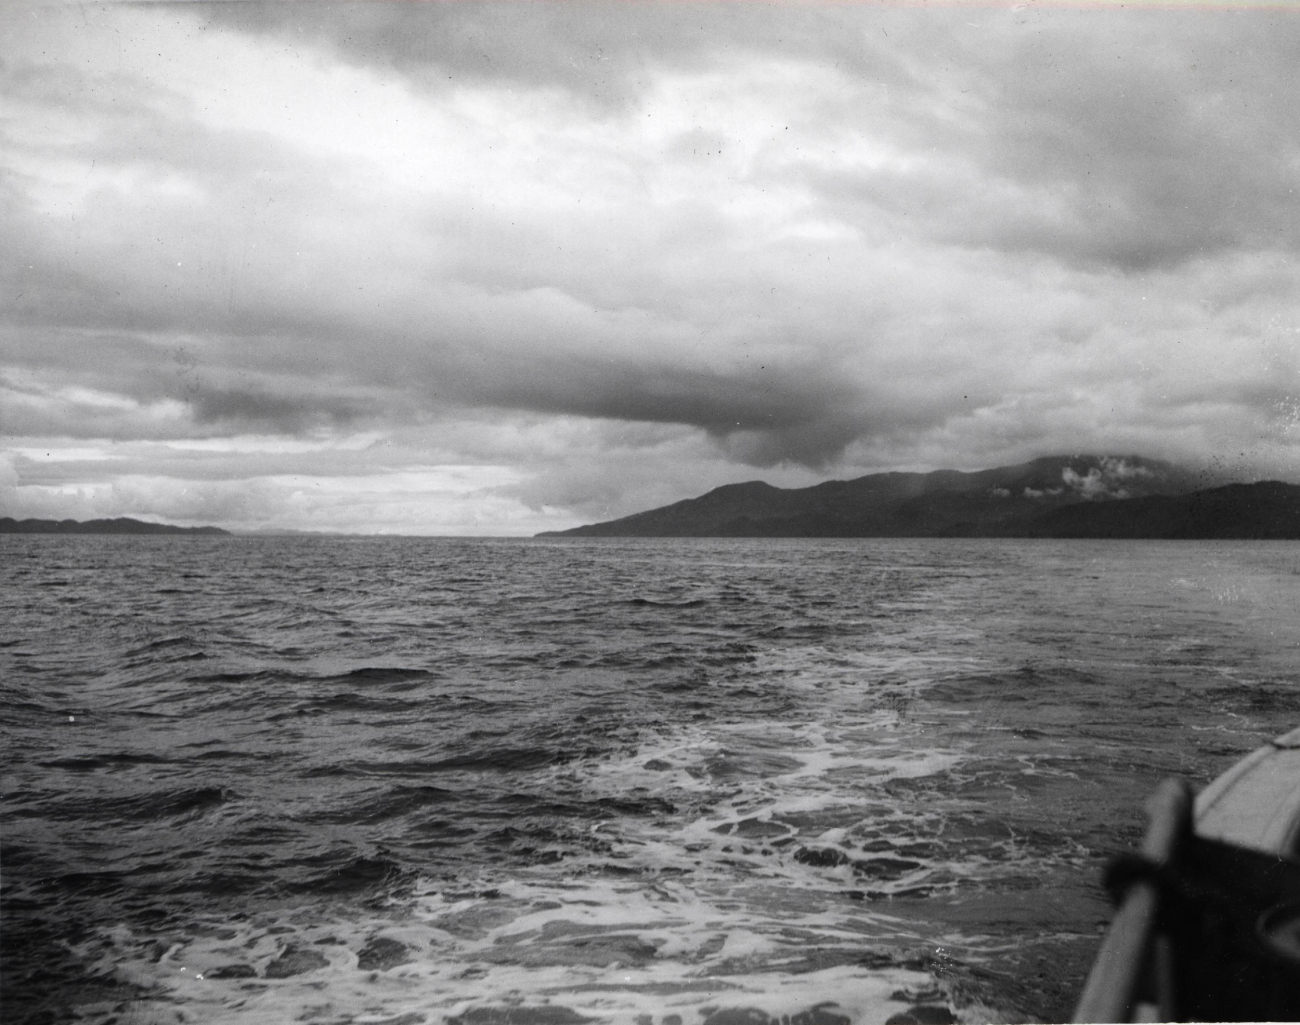 Looking back while entering Wrangell Narrows